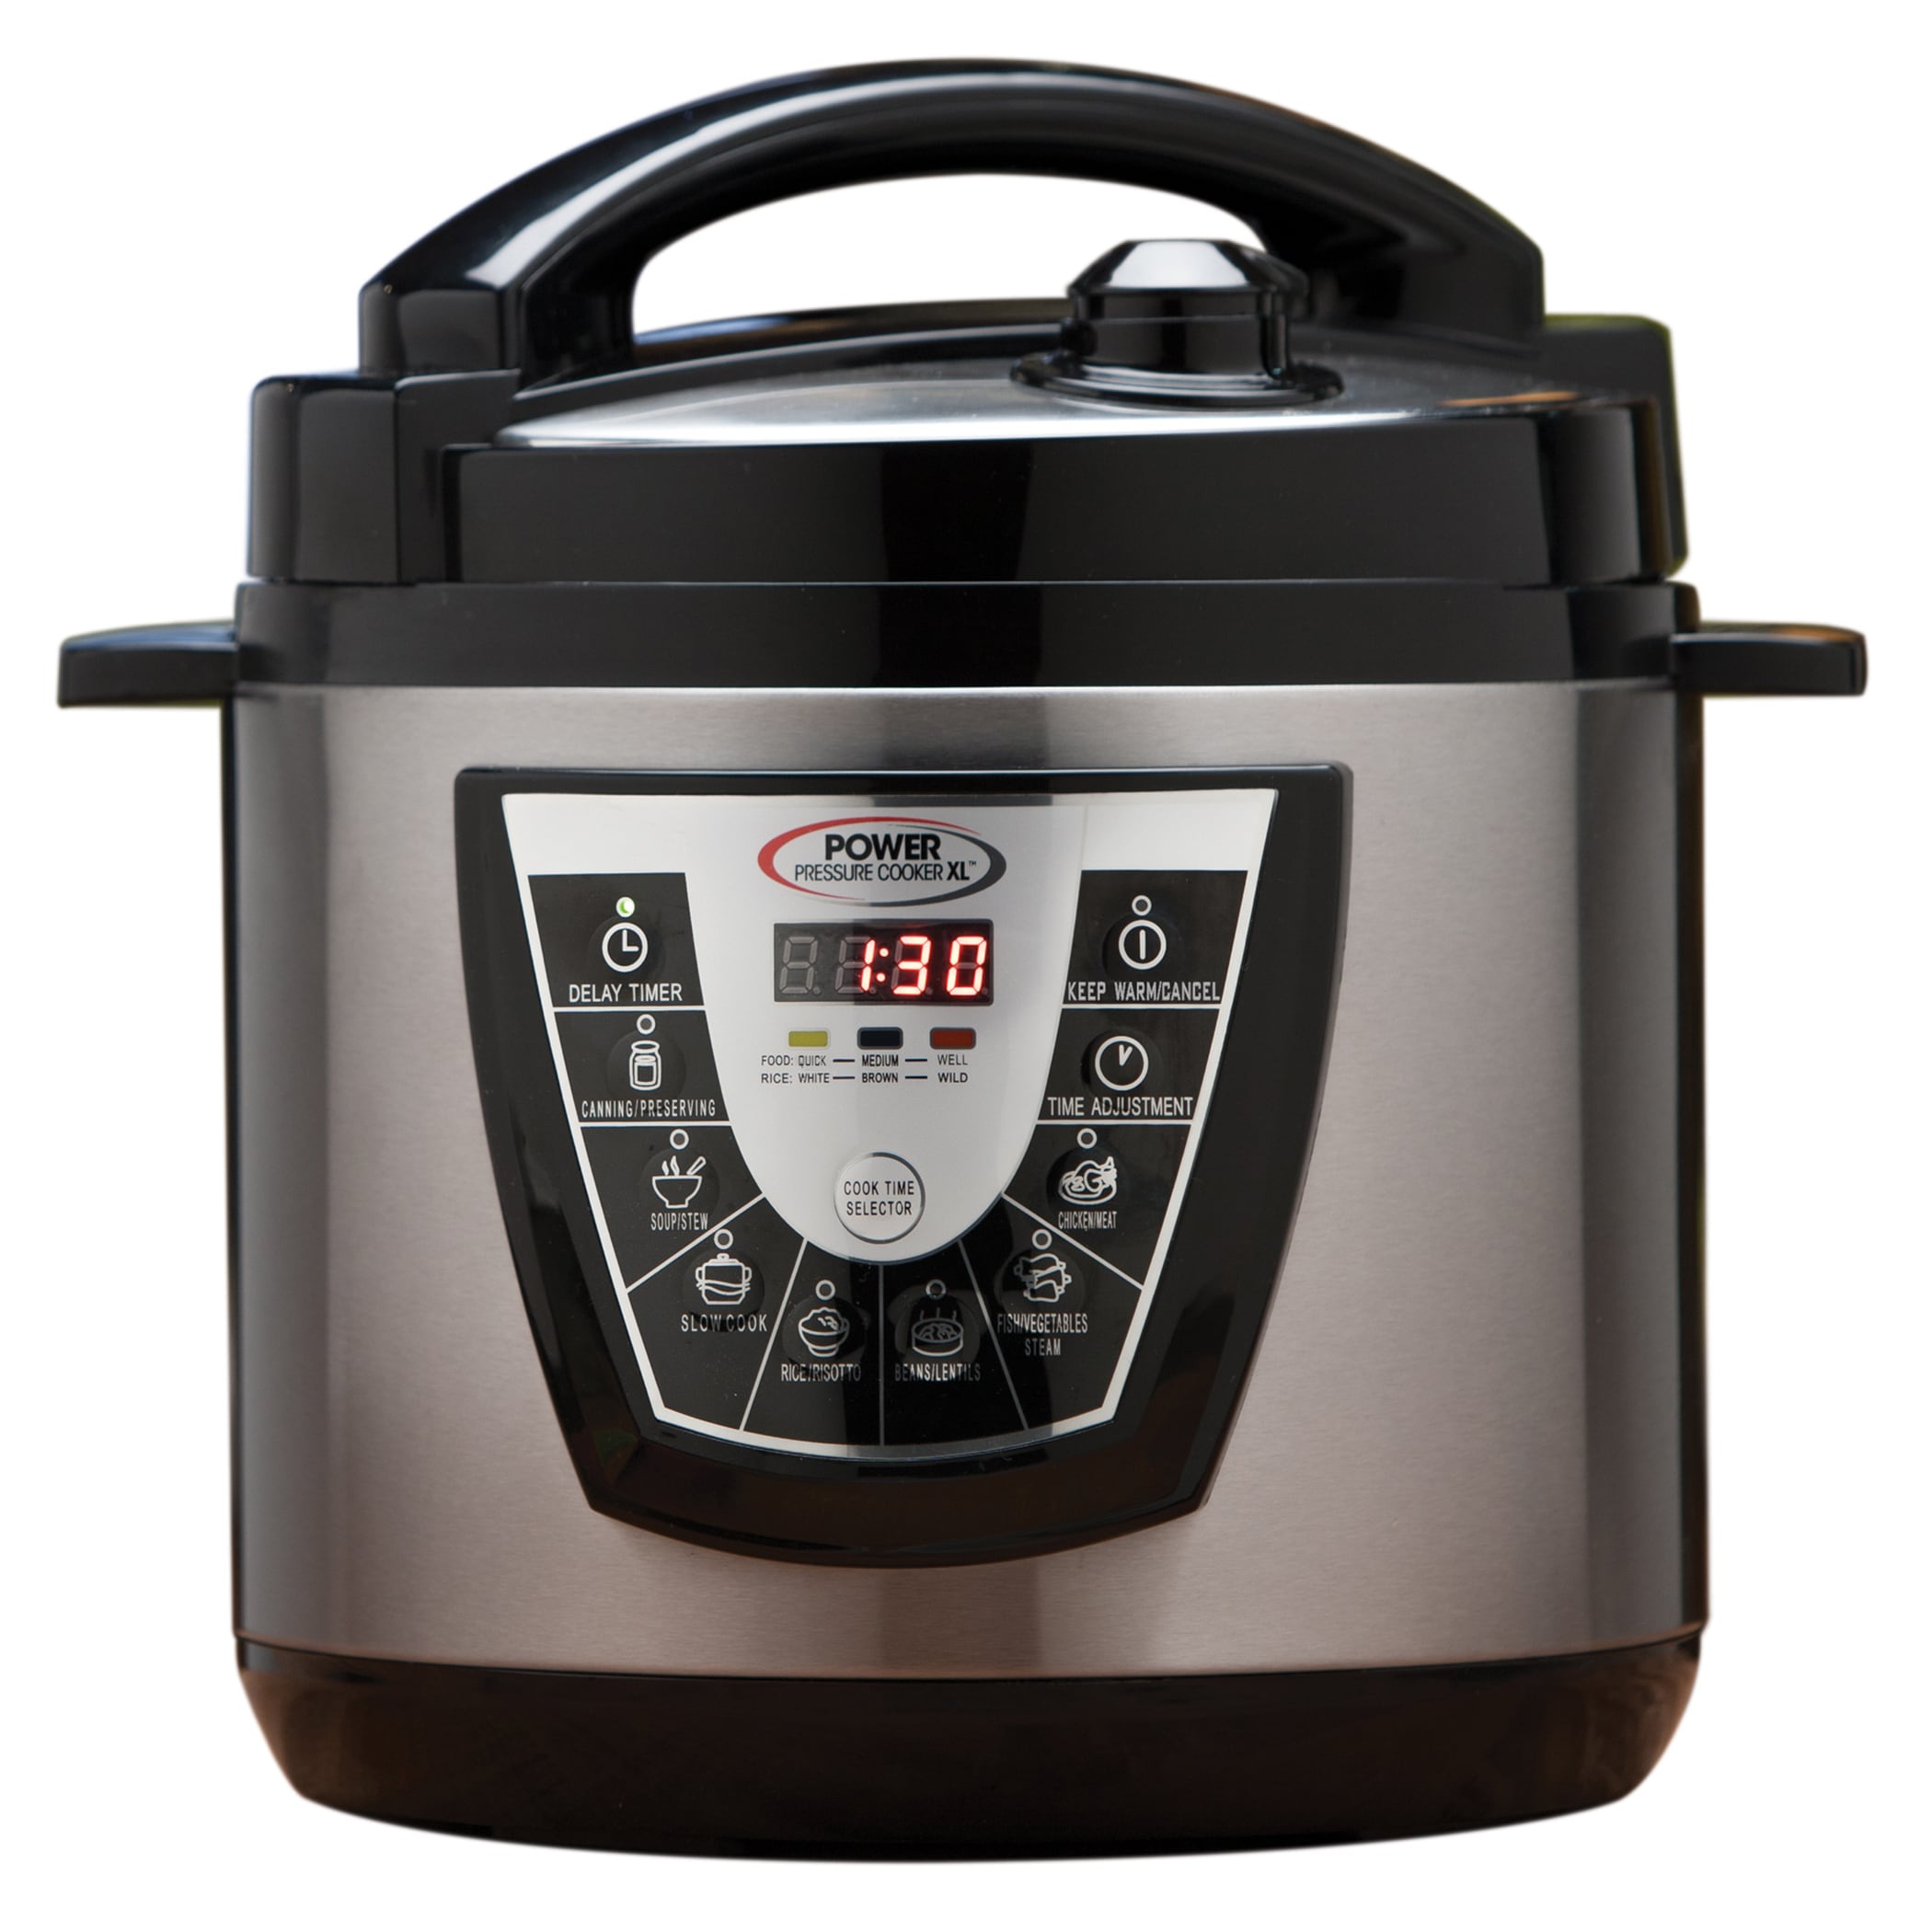 Tristar Products Electric Power Pressure Cooker XL 12 Cup PPC770